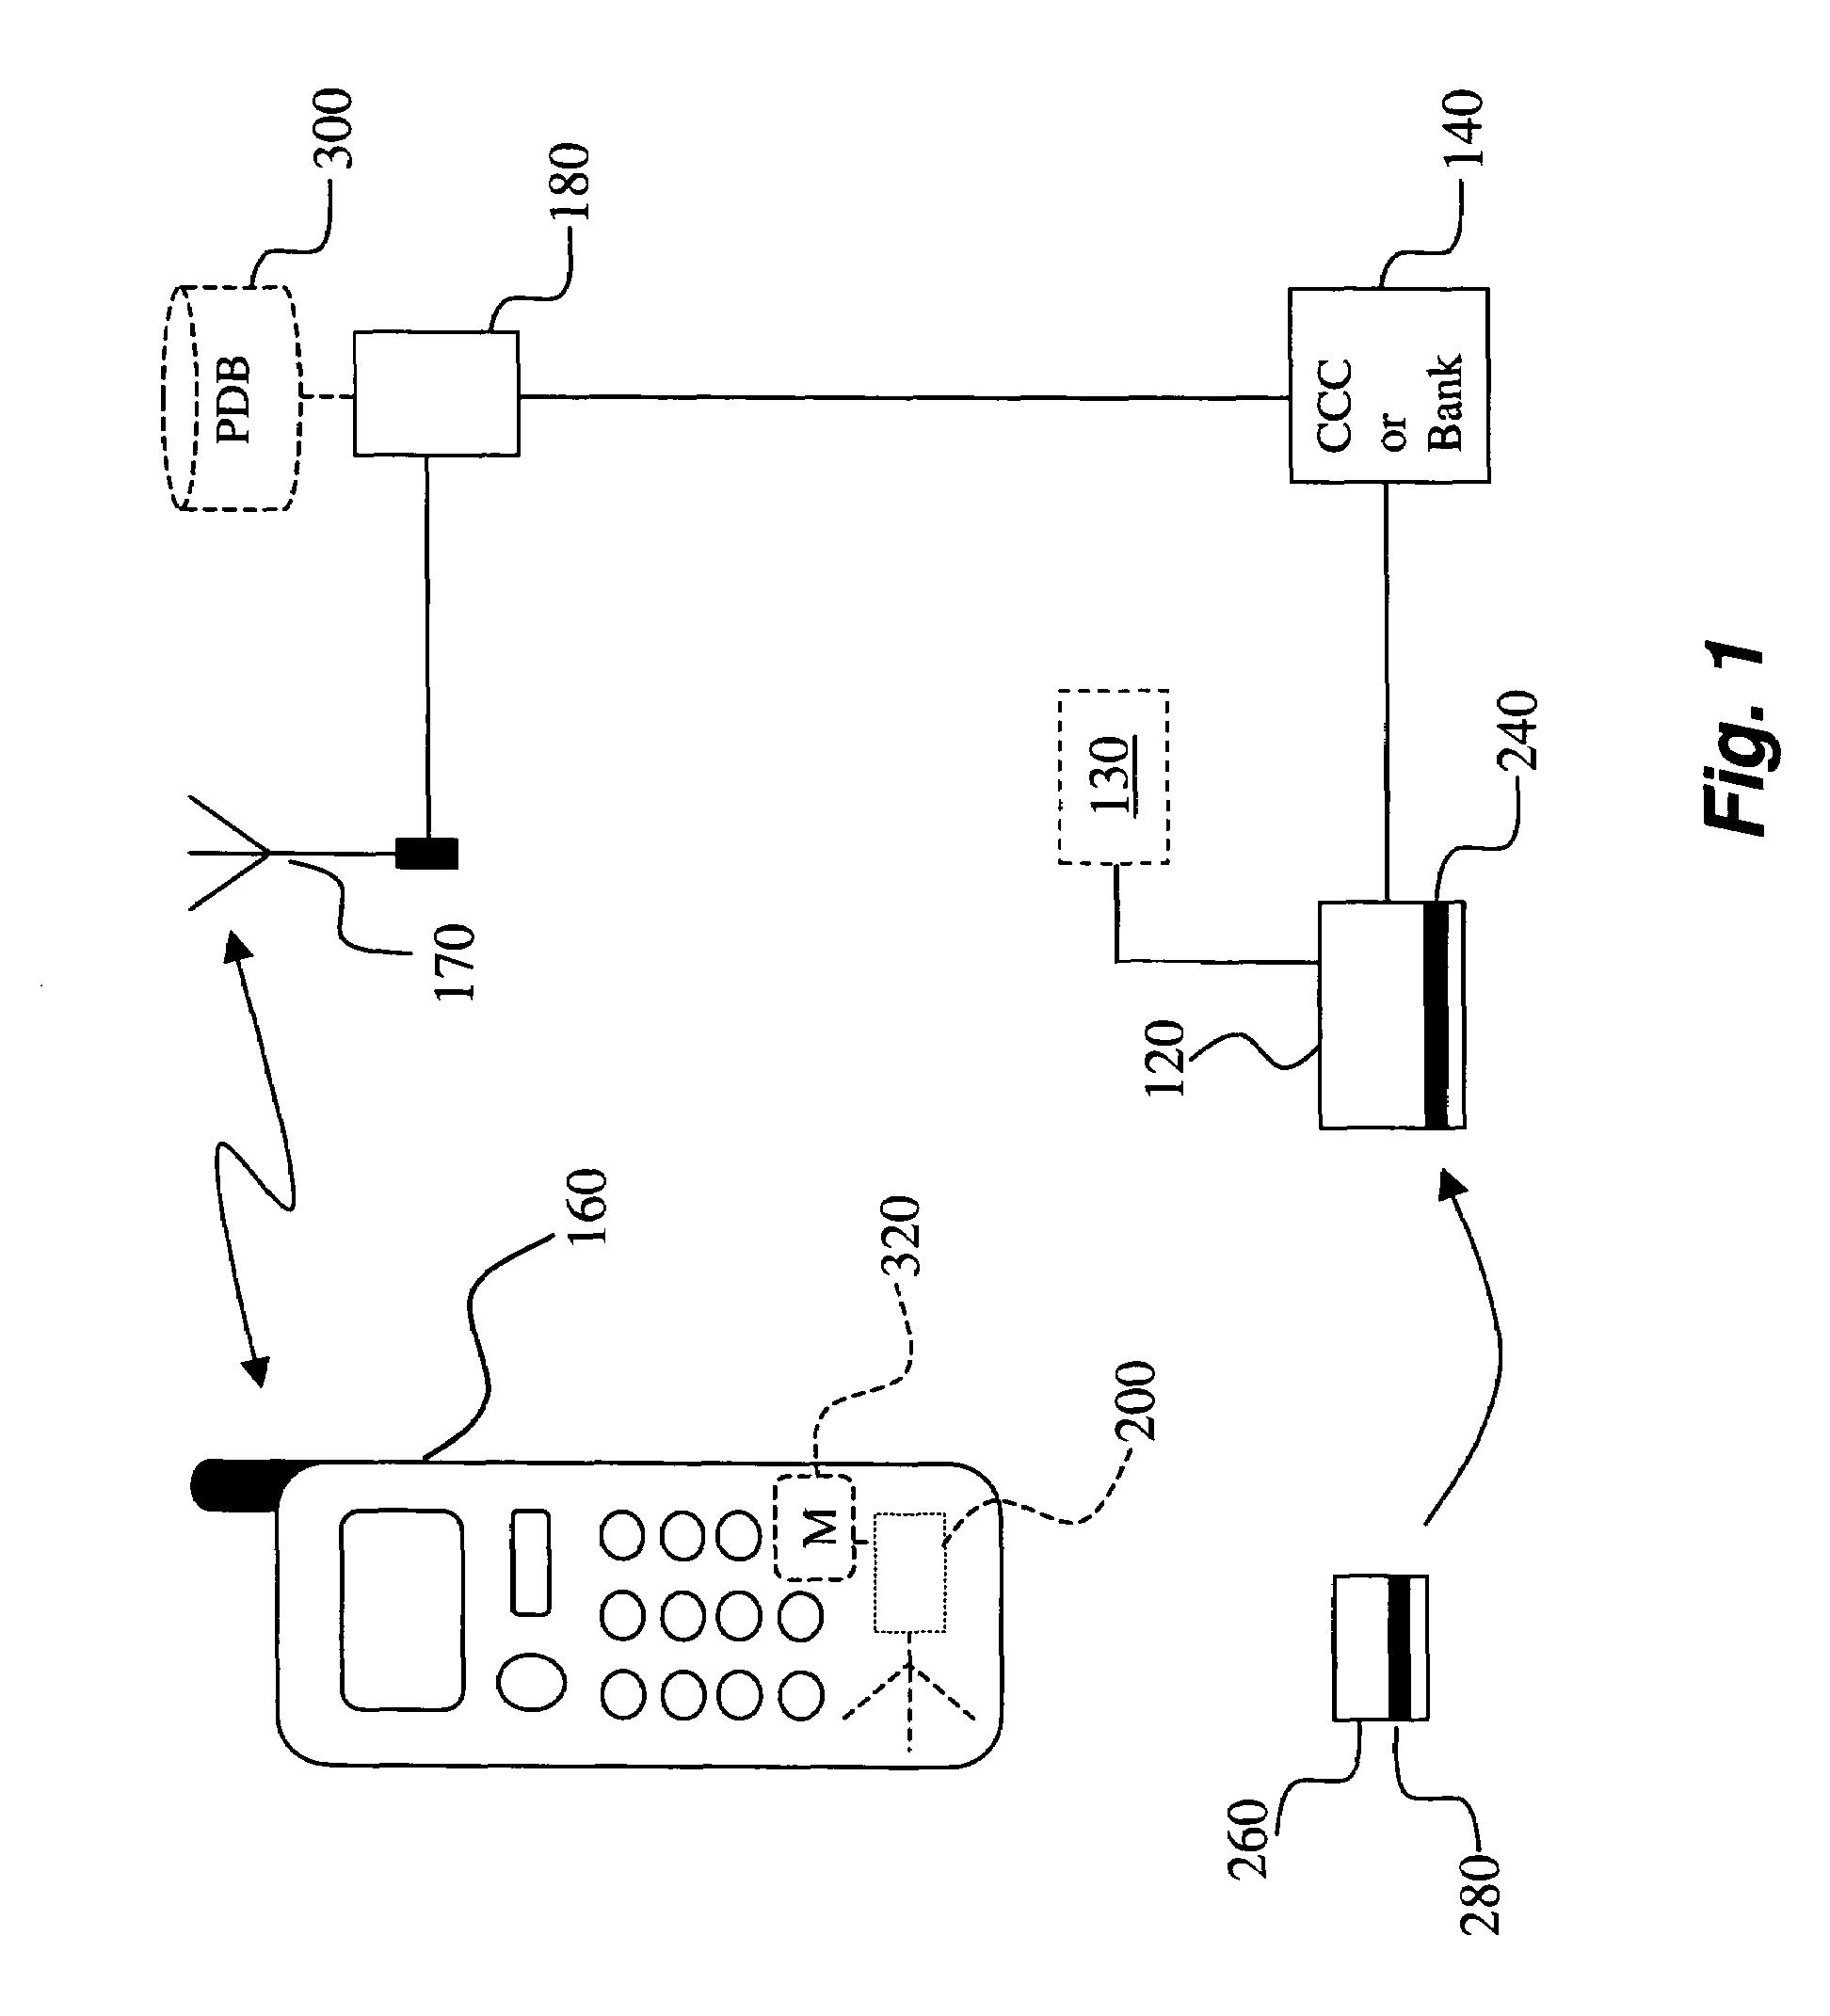 Method and system for monitoring electronic purchases and cash-withdrawals